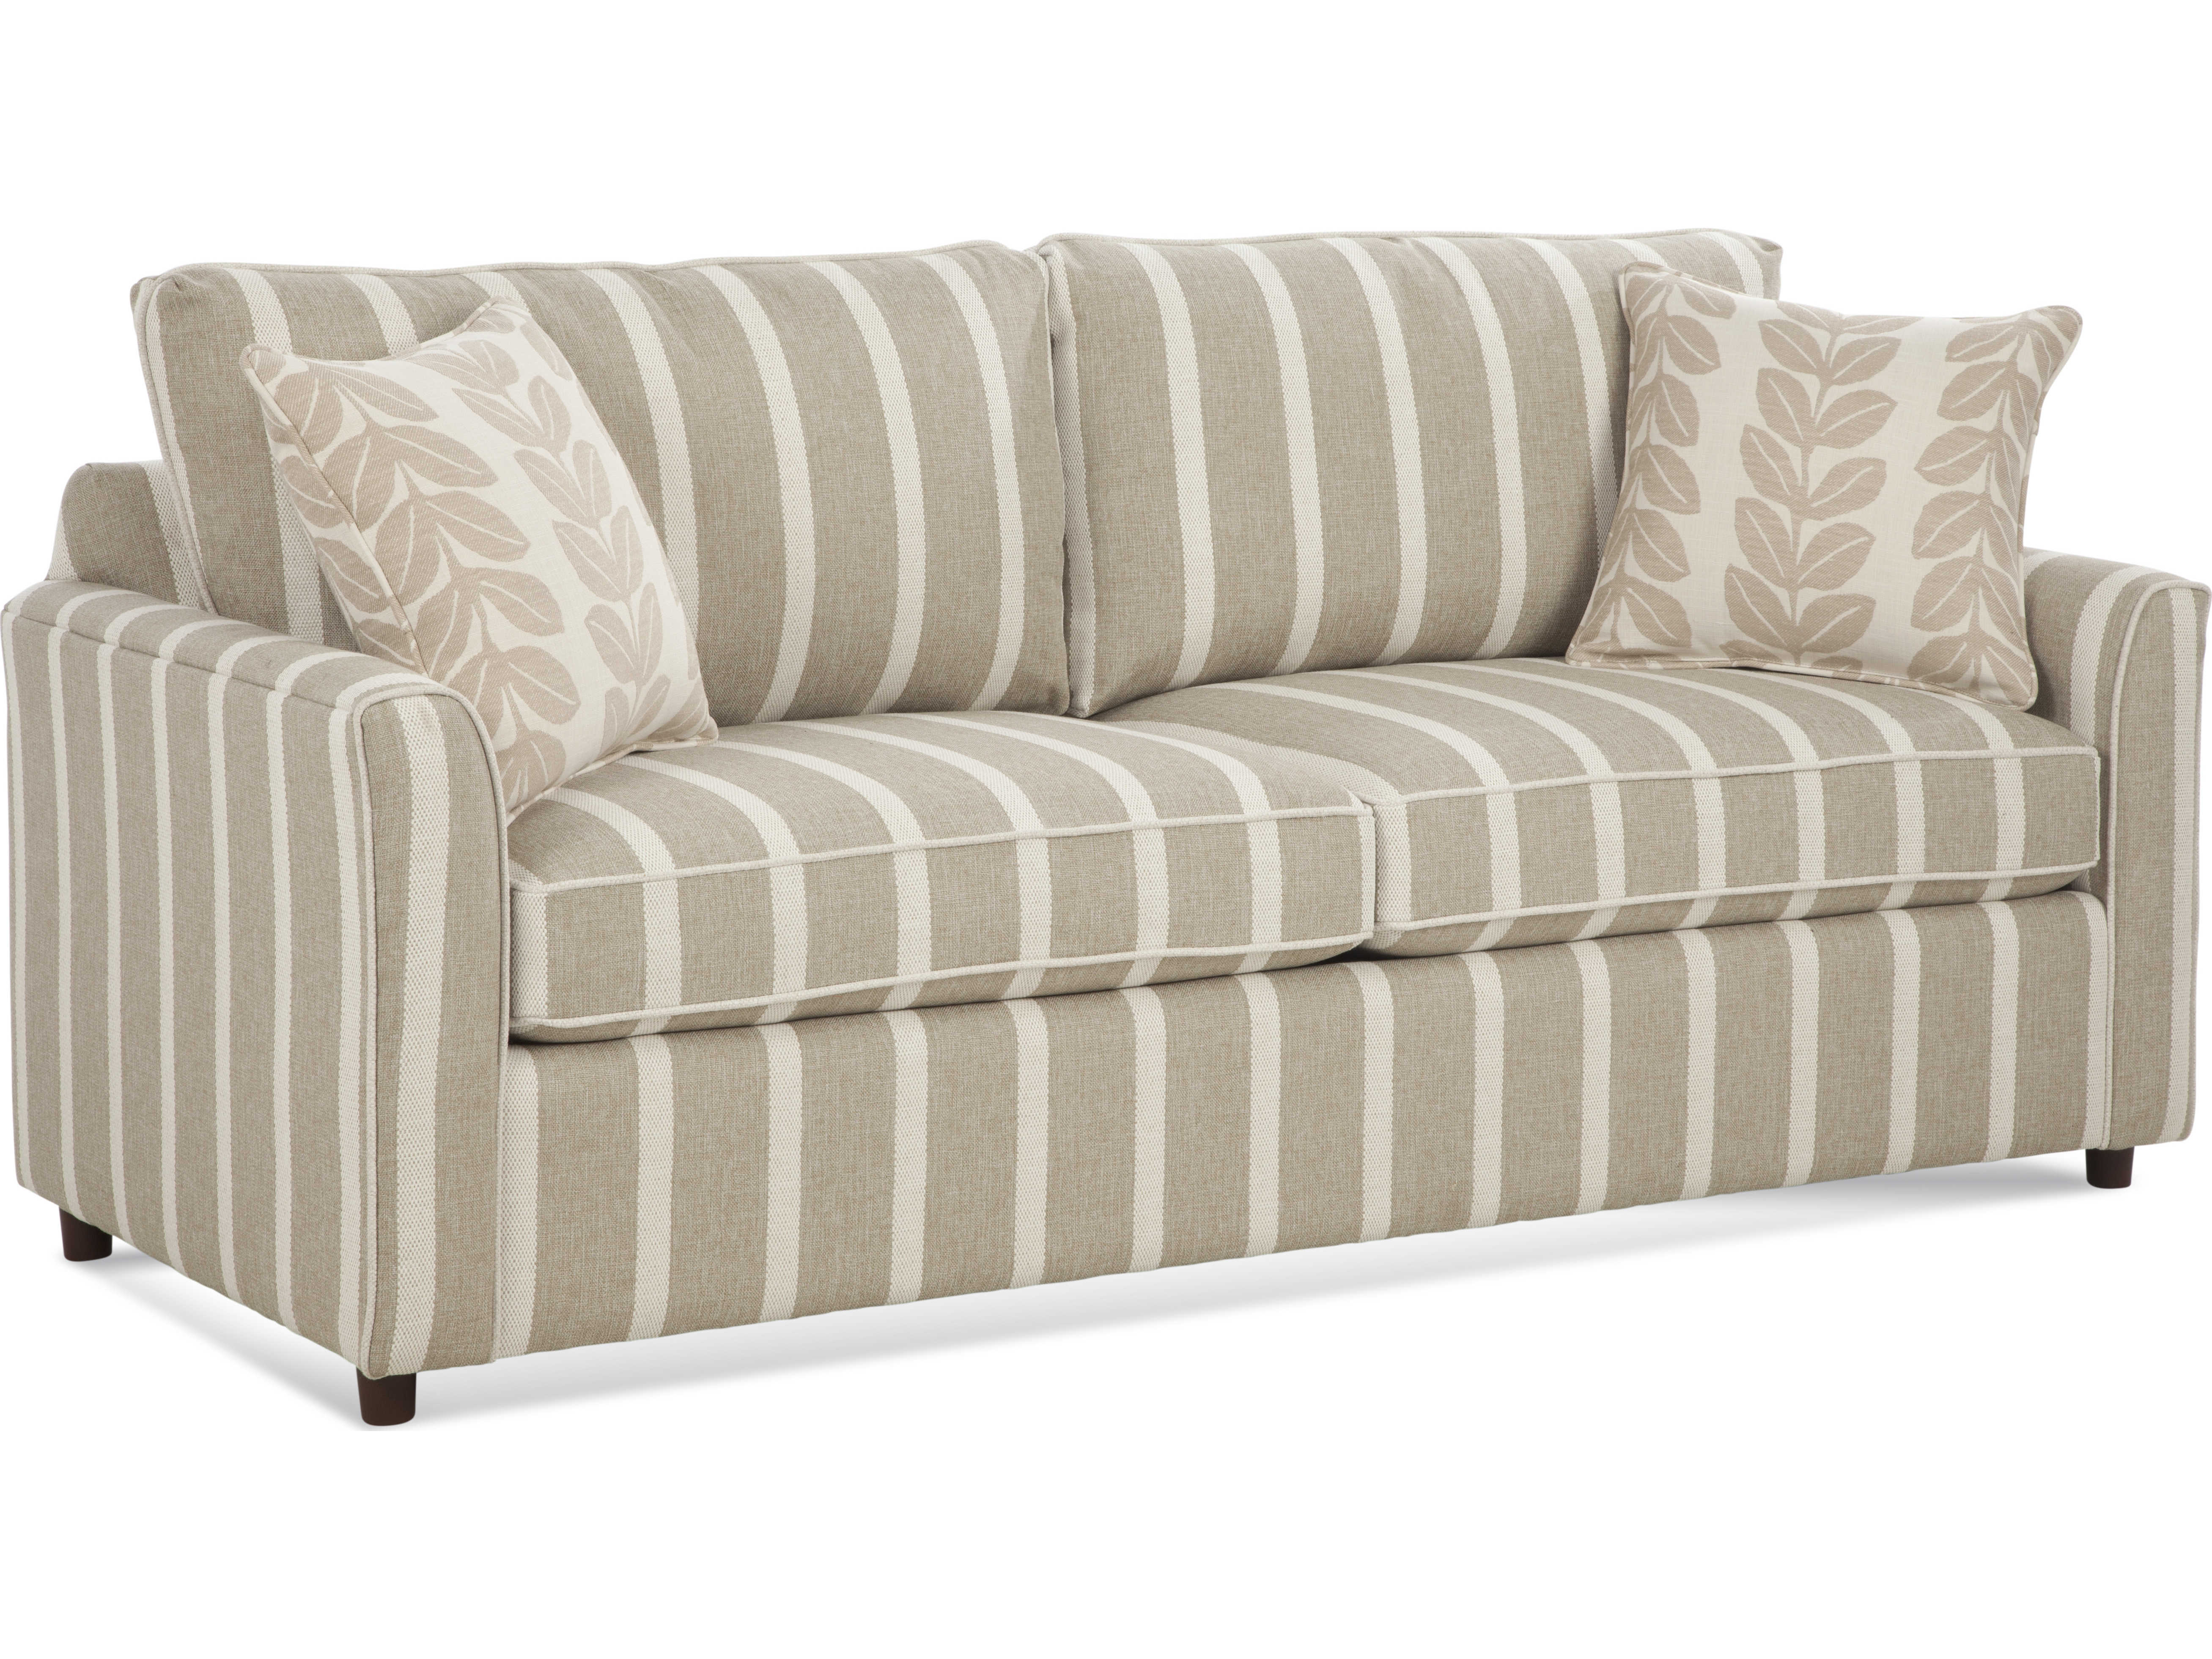 Tufted Fabric Upholstered Sofa Bed